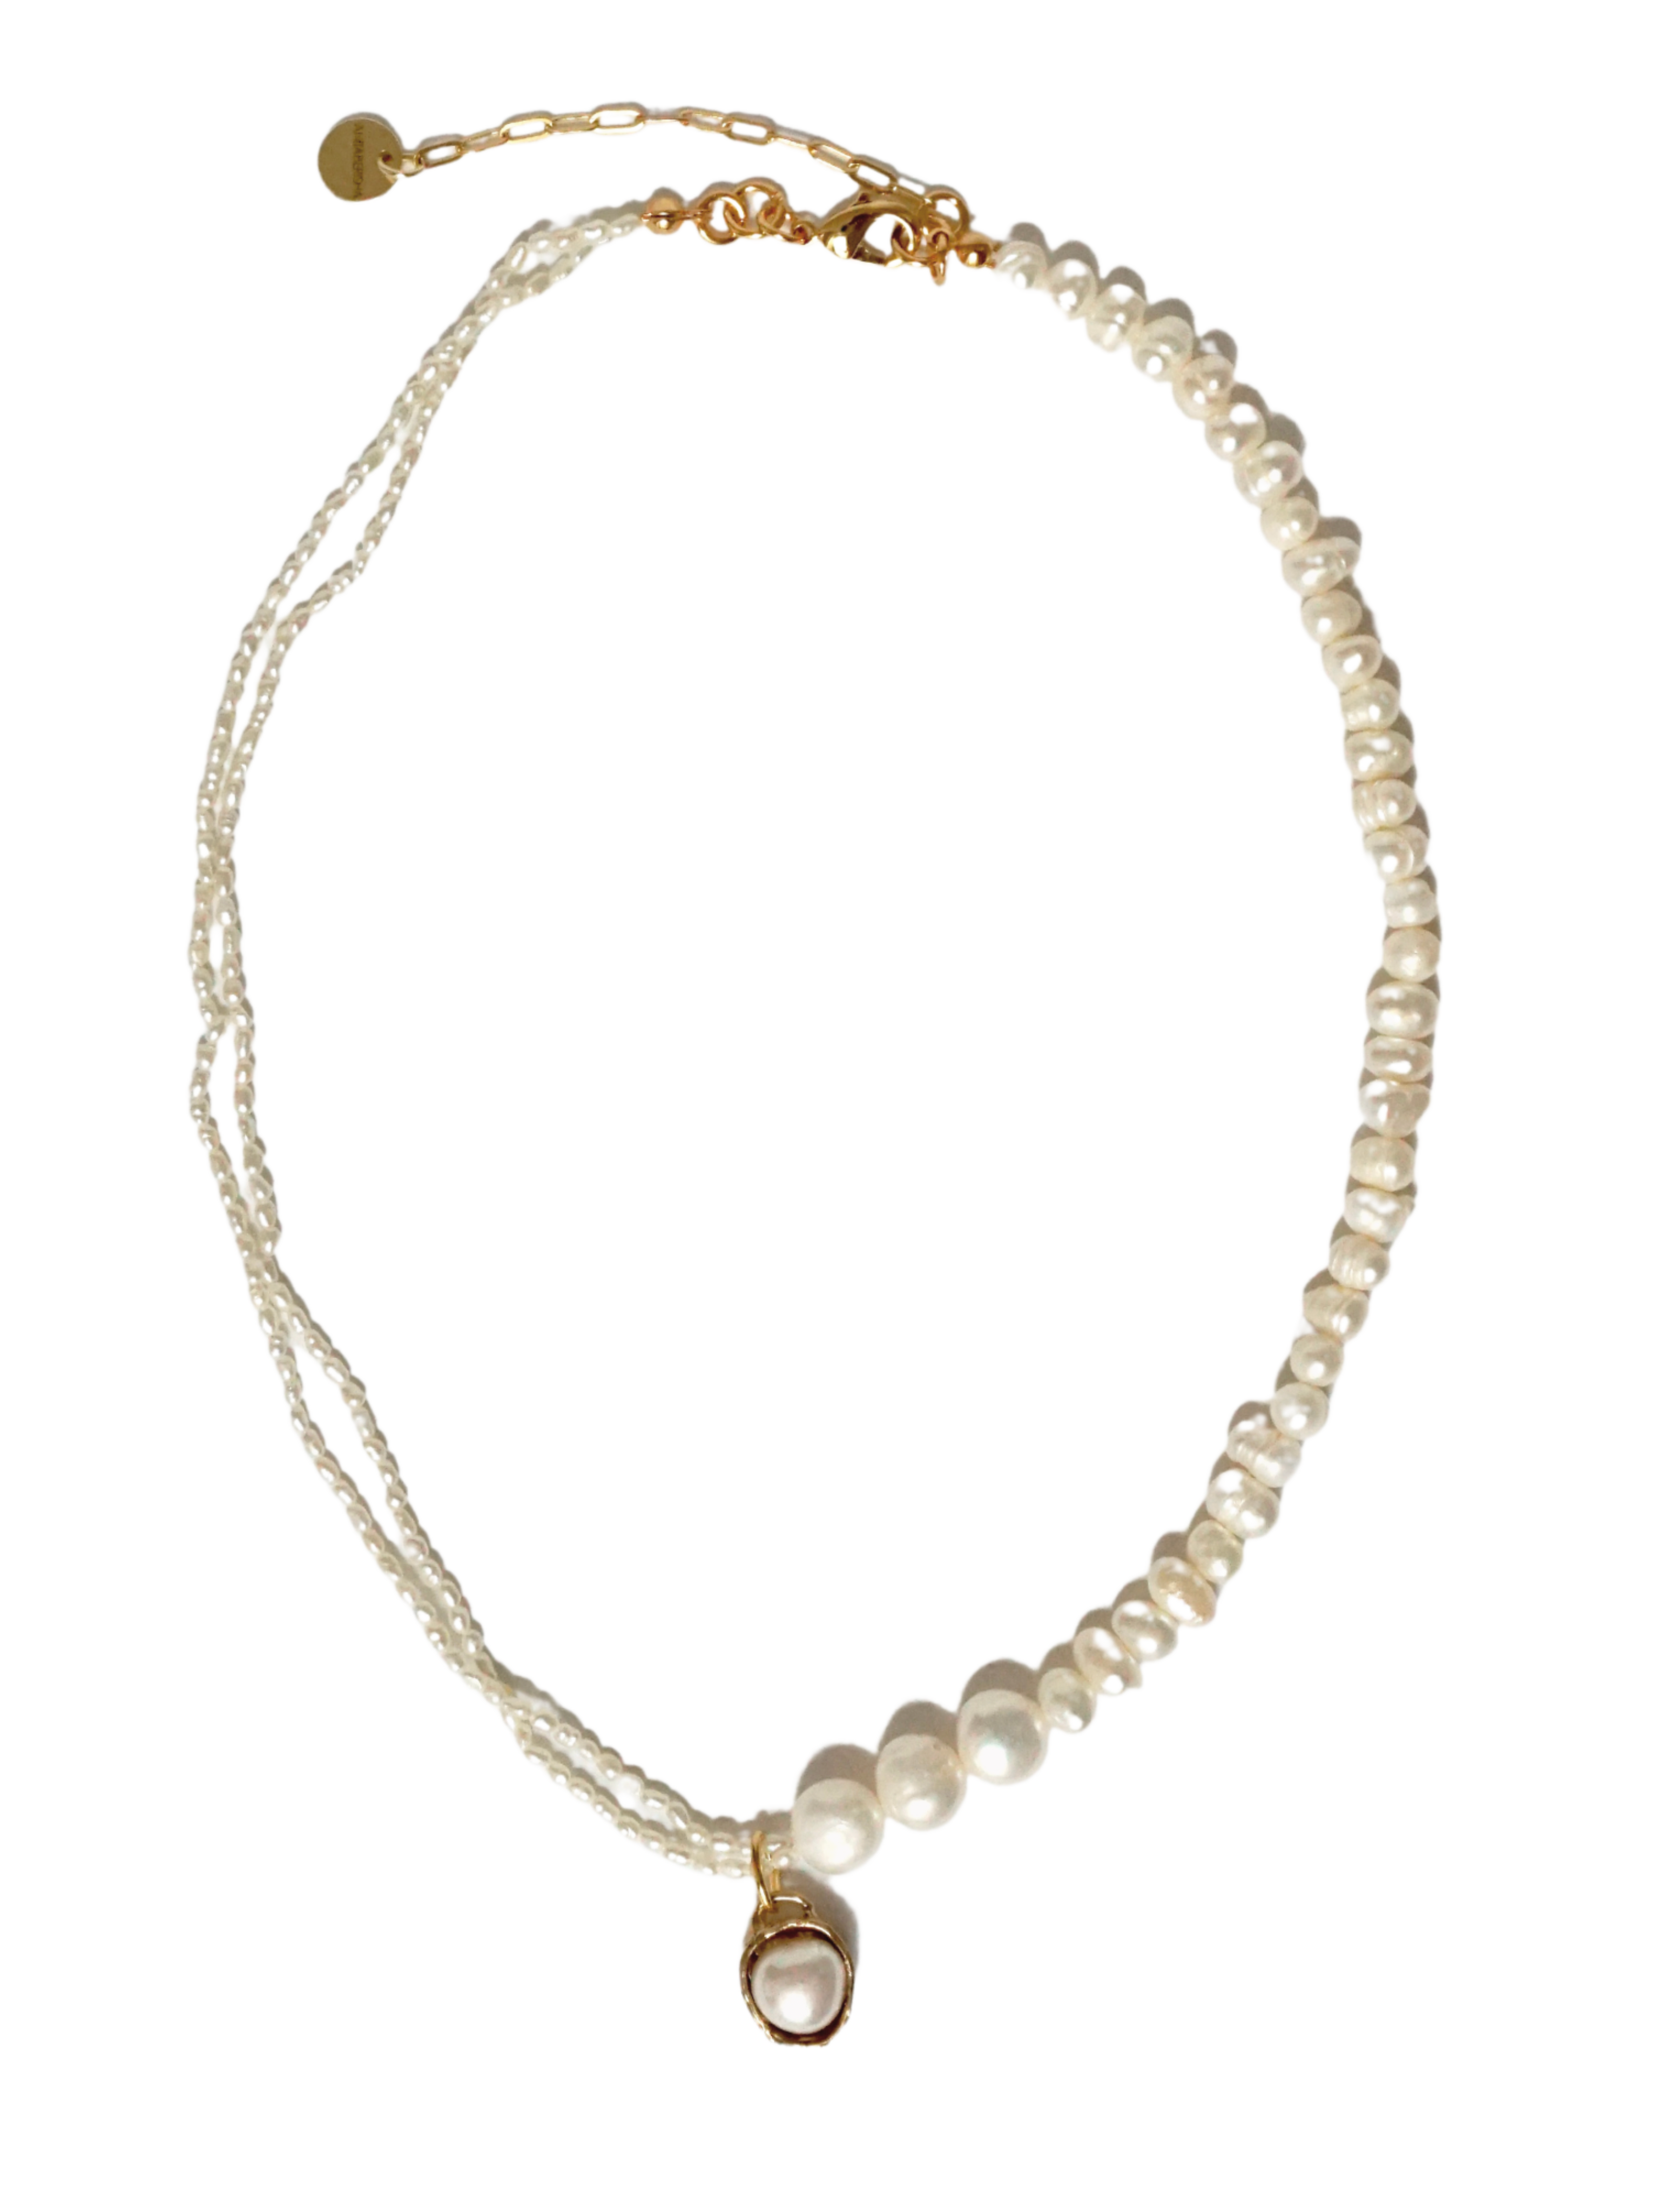 Luxe 14K Gold Plated Metal Pearl Collar Necklace - francesca's